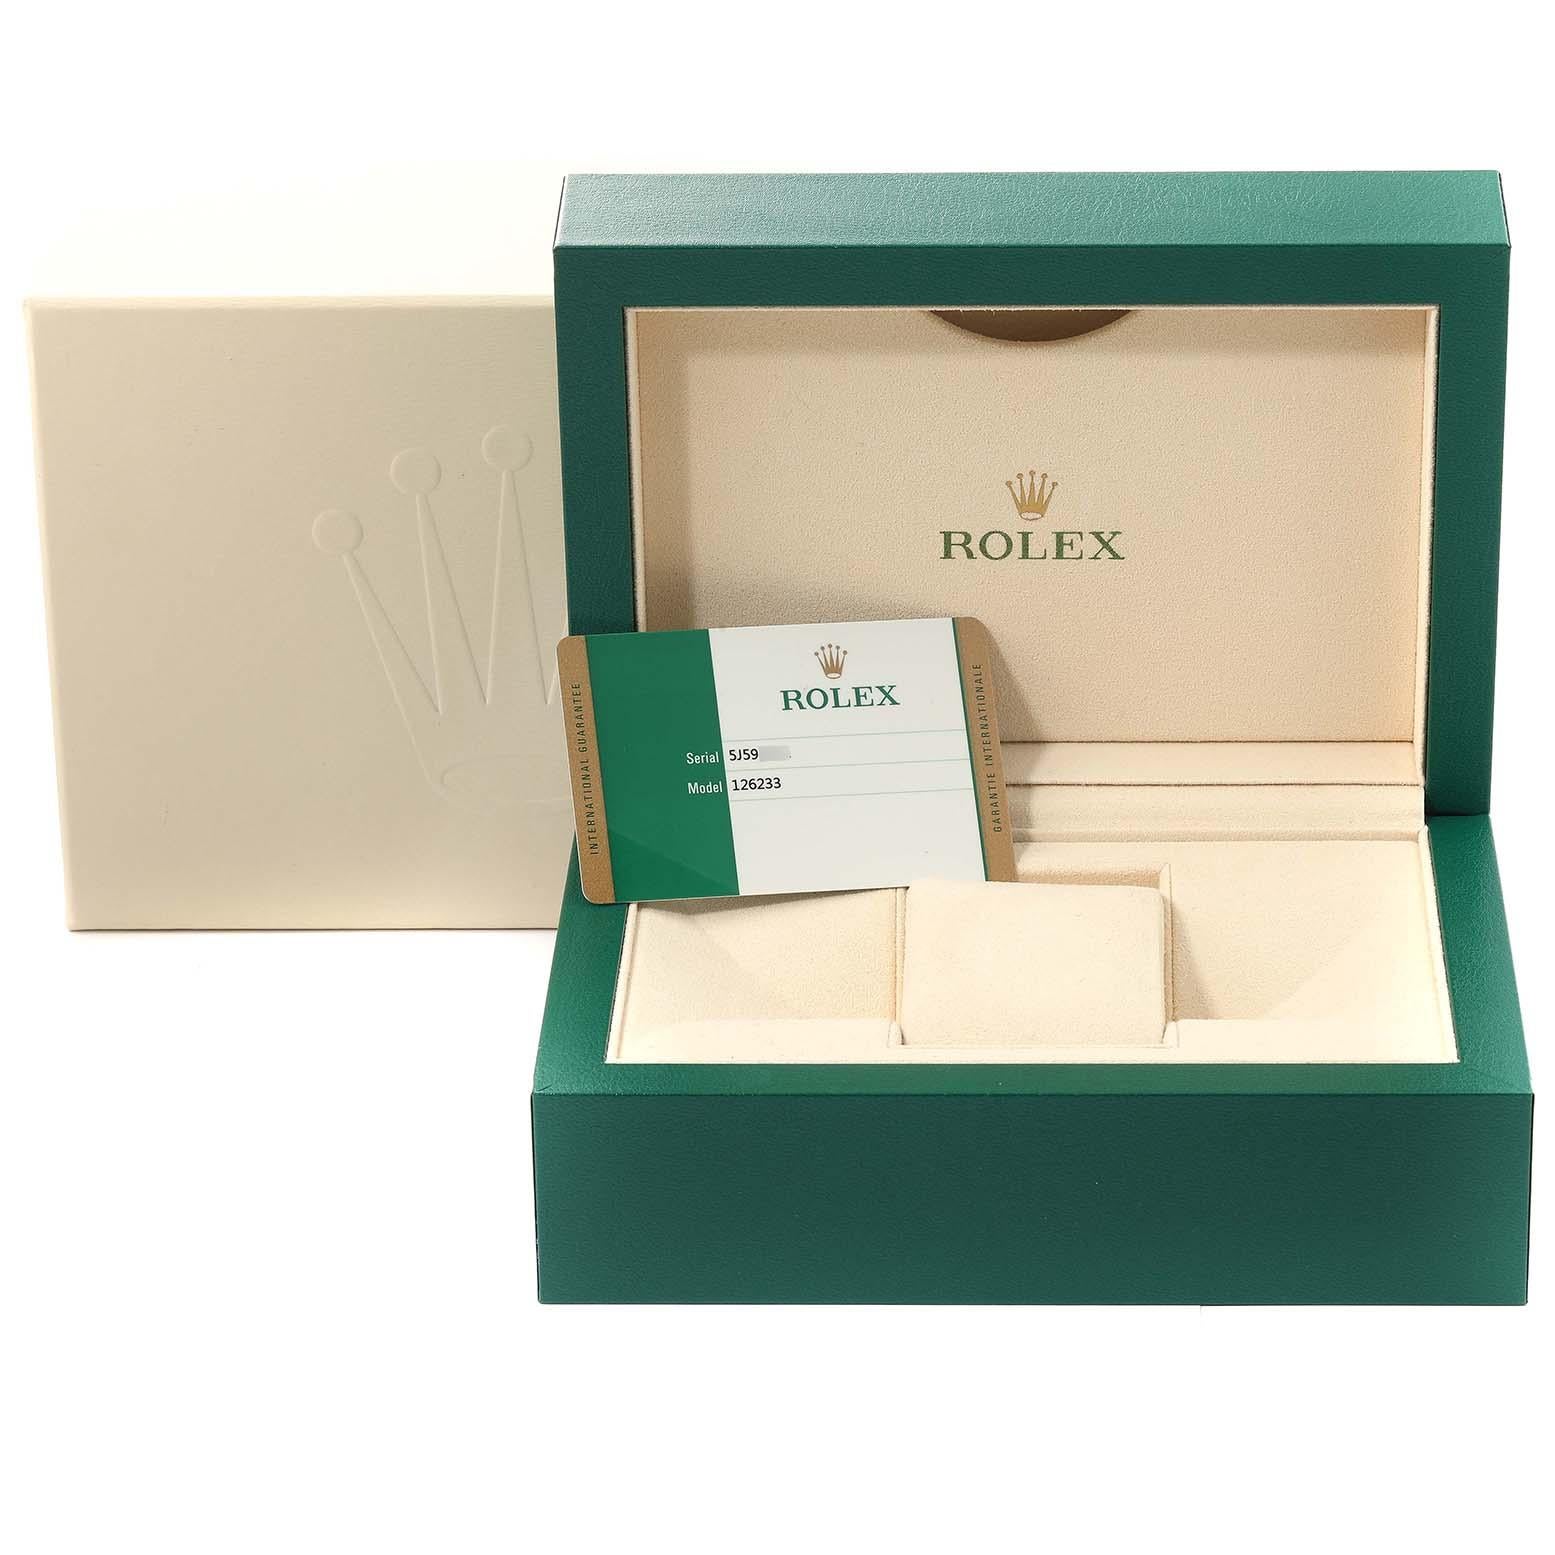 Rolex Datejust Steel Yellow Gold White Dial Mens Watch 126233 Box Card For Sale 7